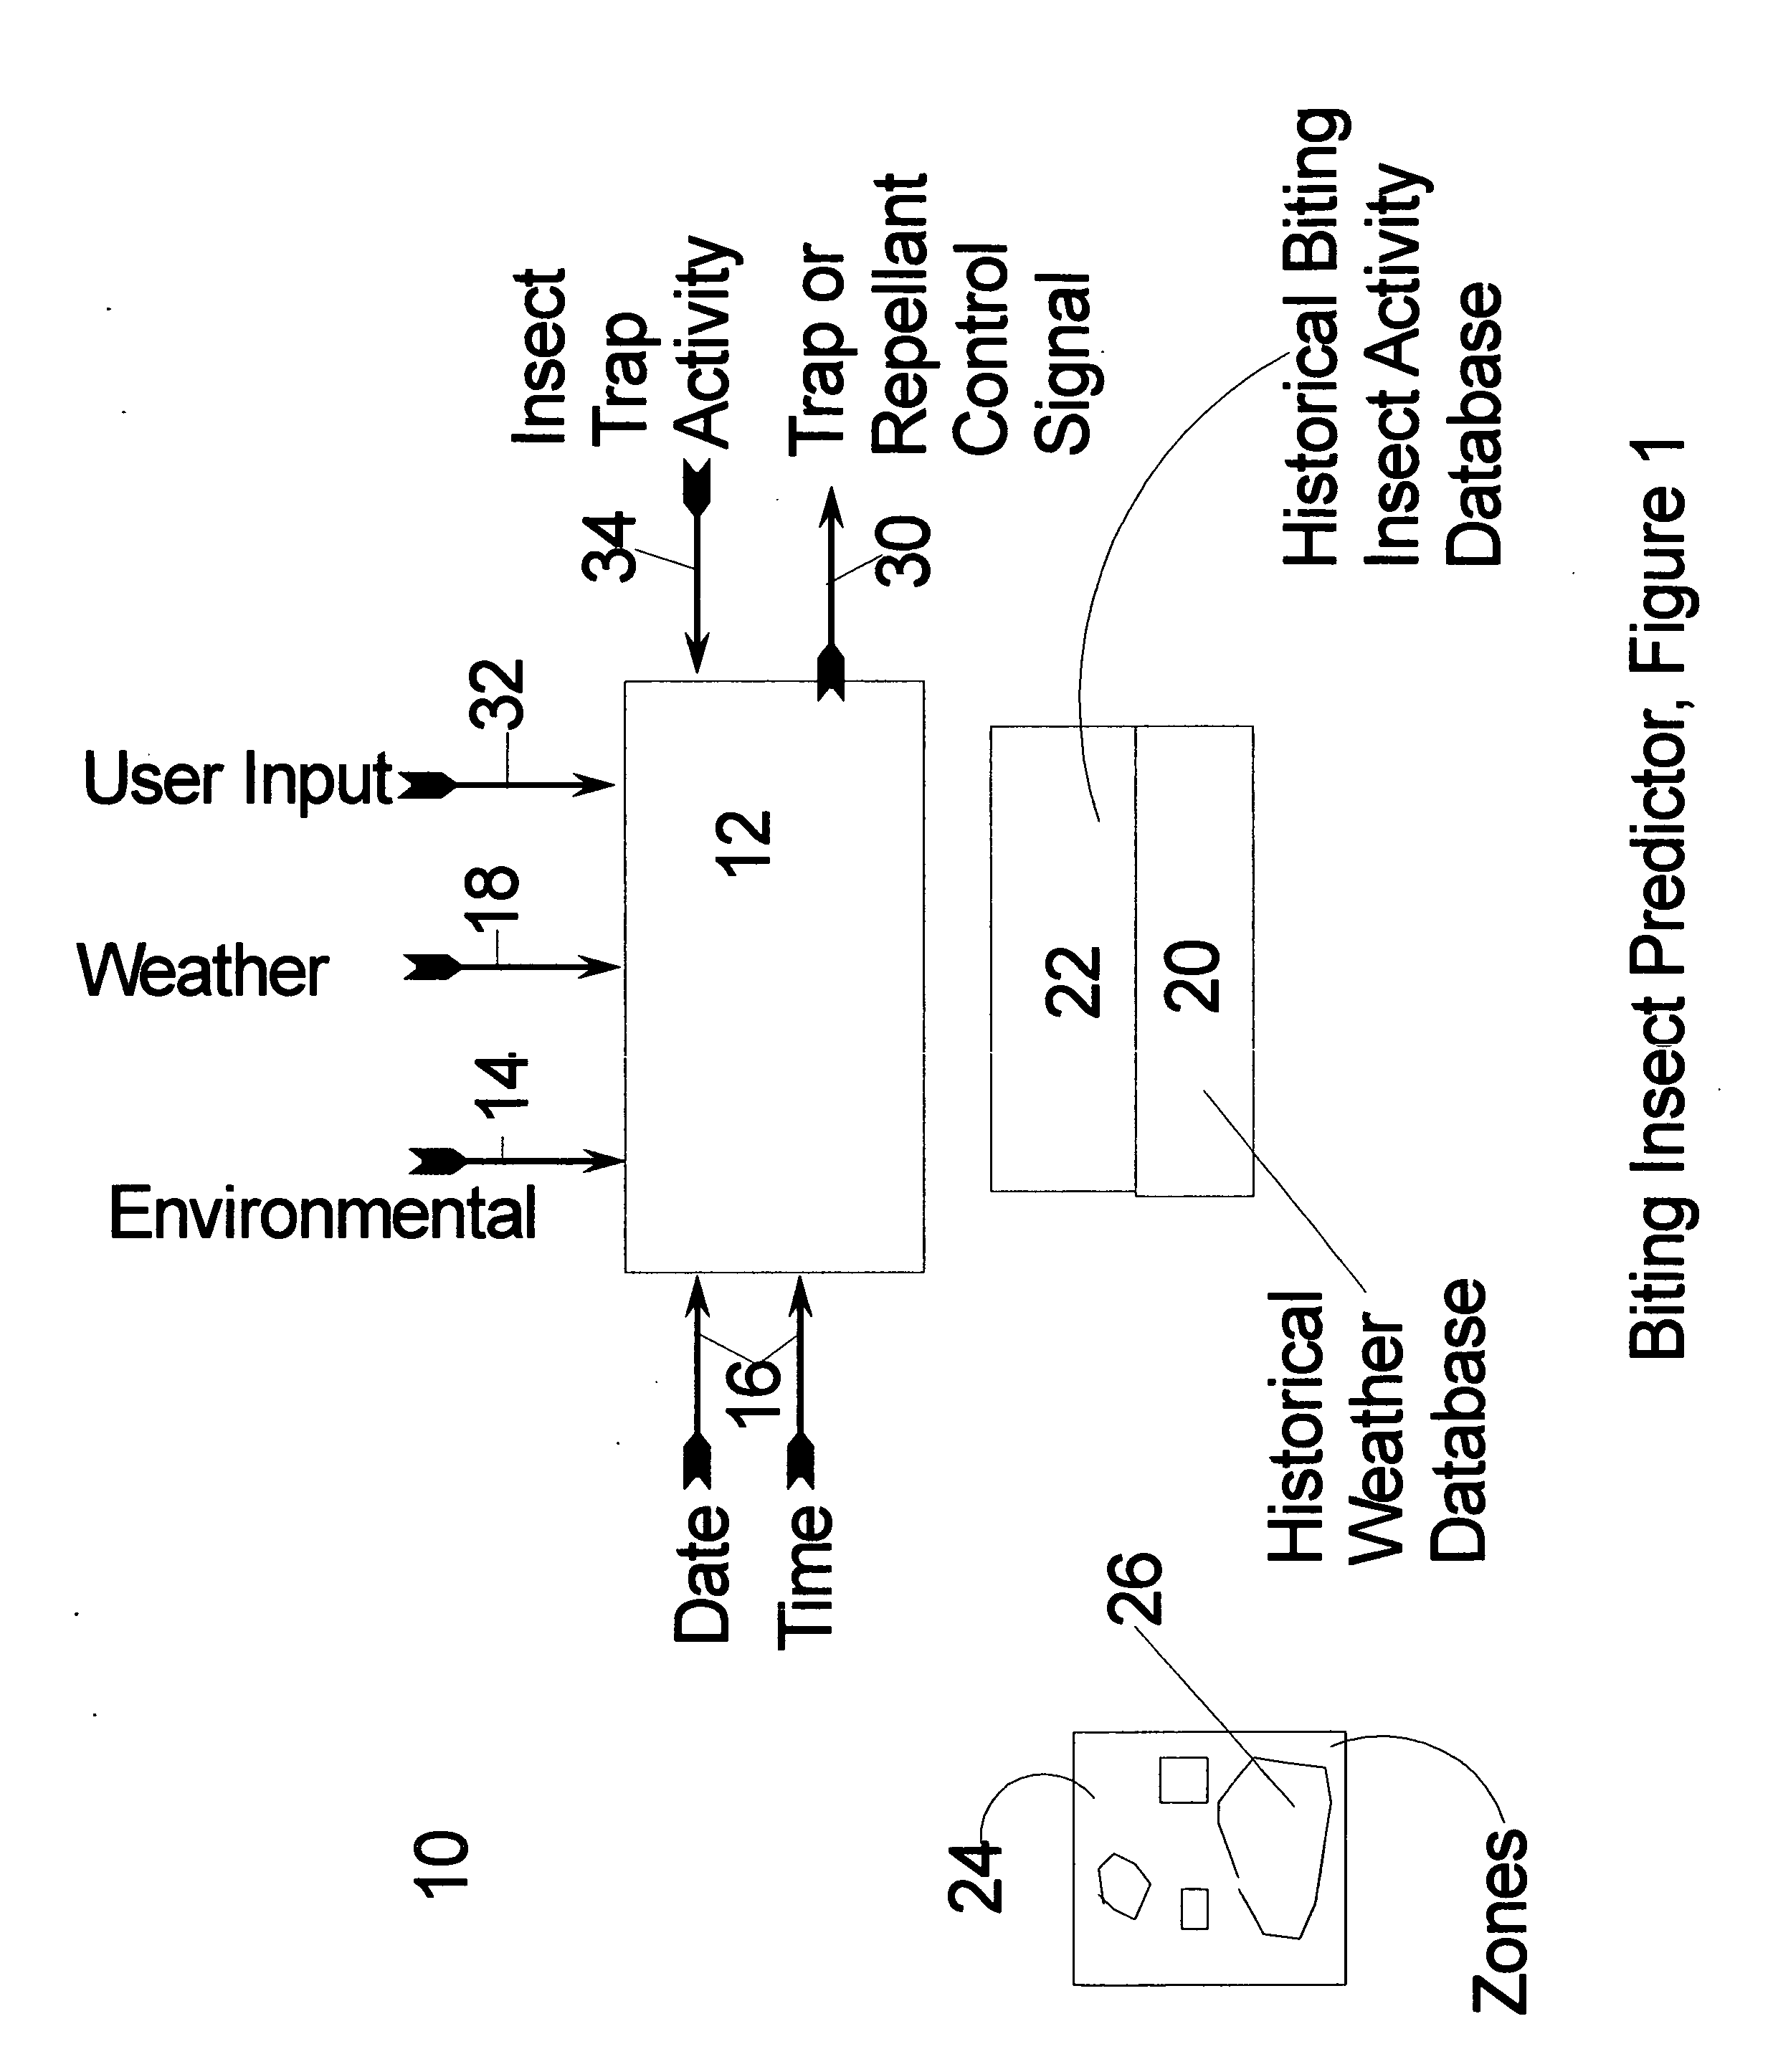 System and method for predicting biting insect conditions